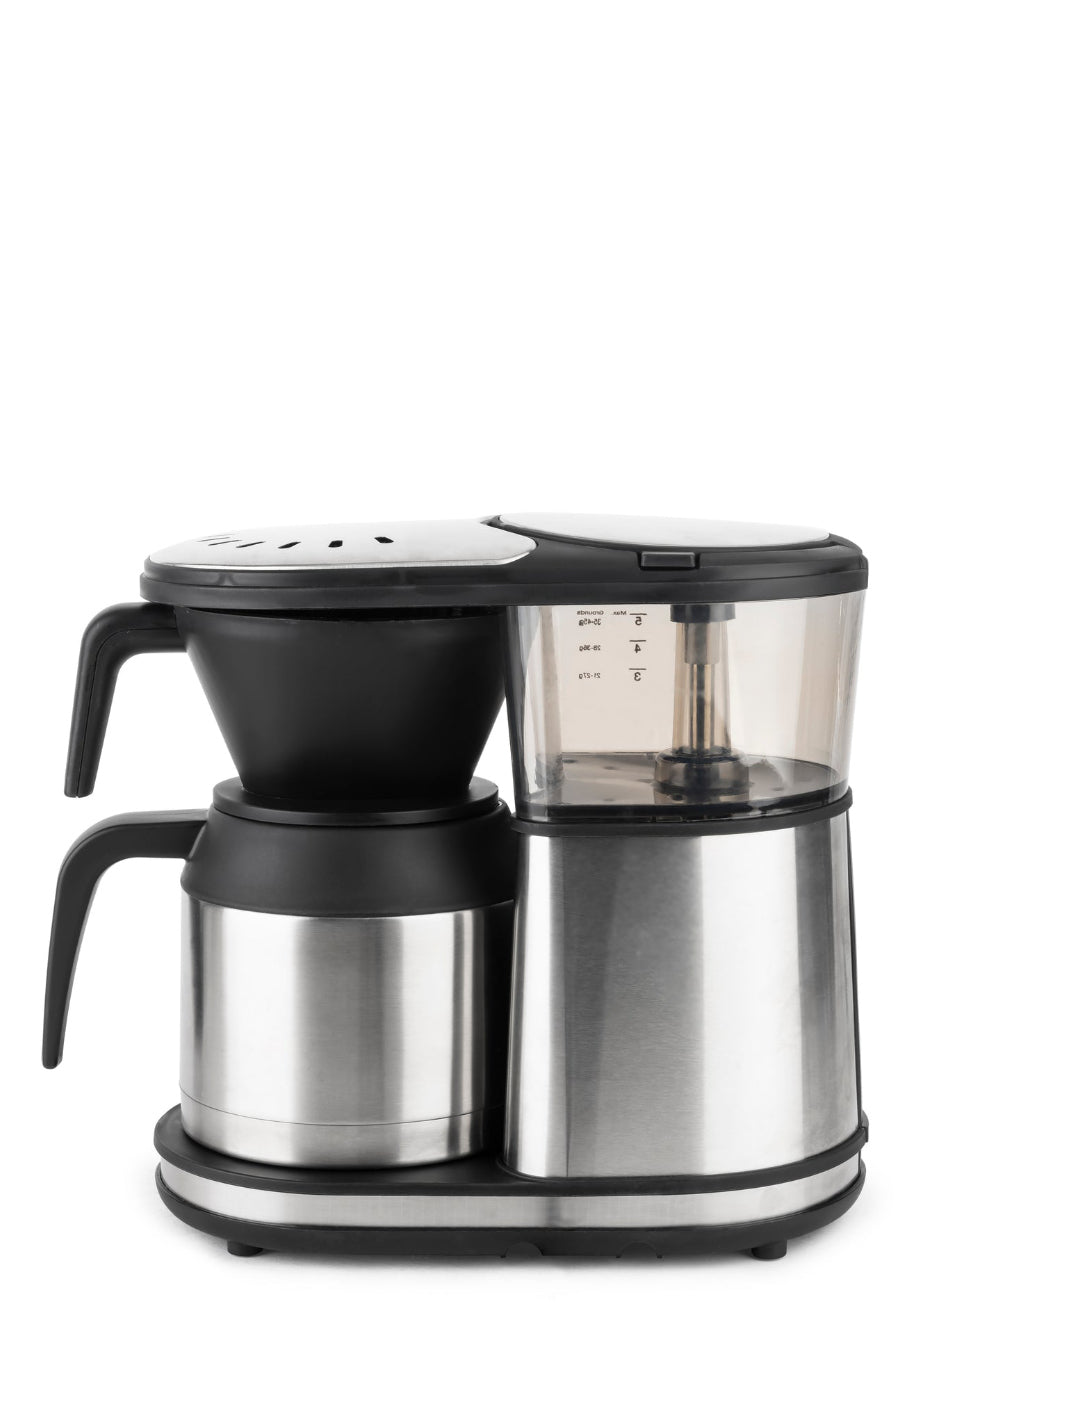 Bonavita 8-Cup One-Touch Thermal Carafe Brewer